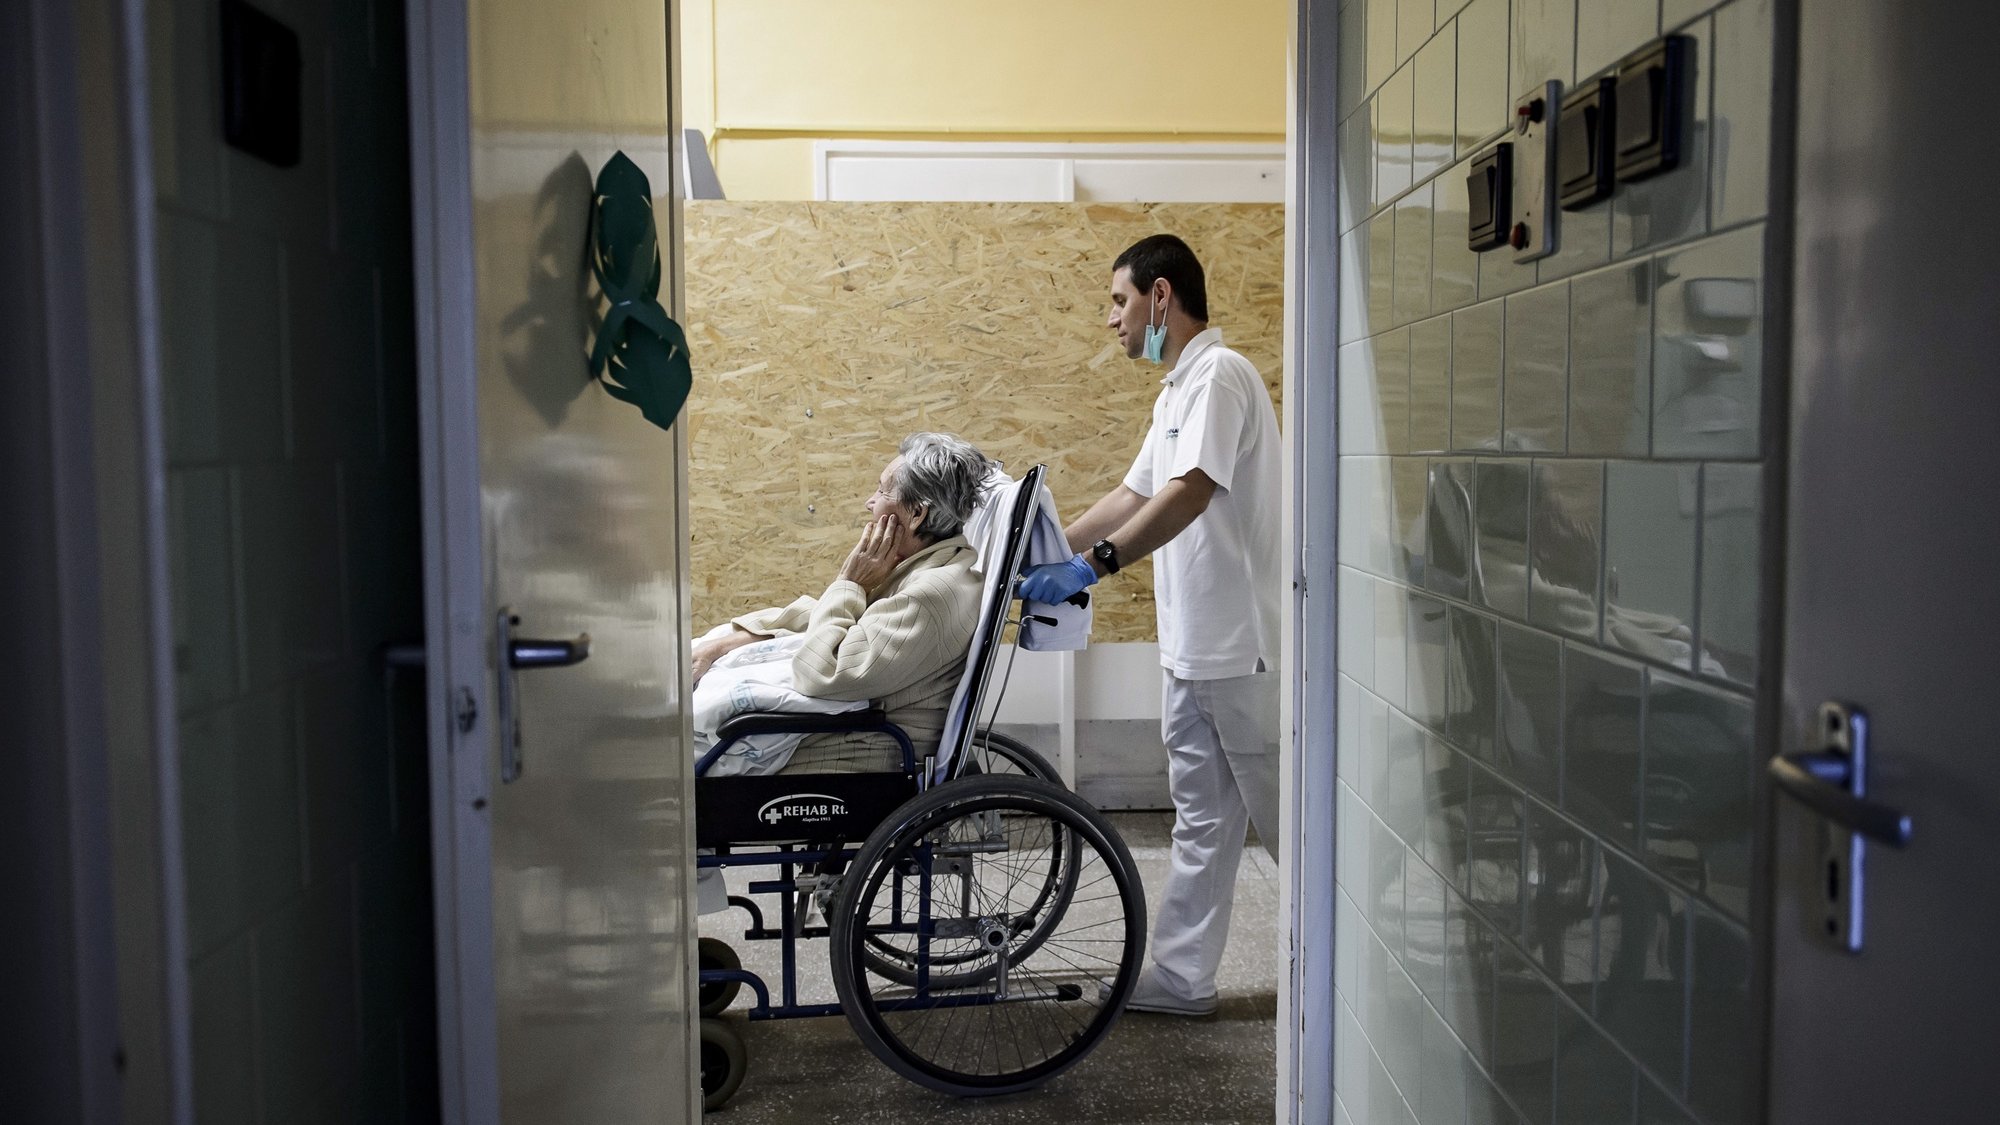 epa07912399 A healthcare professional takes and elderly lady in a wheelchair in the Hospice Department of Markhot Ferenc Hospital in Eger, northern Hungary, 27 September 2019 (issued 11 October 2019). World Hospice and Palliative Care Day is observed annually on the second Saturday of October, which falls on 12 October this year with the motto &#039;My care is my right.&#039; The first such event was organised in 2005 by a committee of the Worldwide Palliative Care Alliance, a wordwide network of hospice and palliative care organisations to draw attention to the needs of people who have been impacted by a life-limiting illness. Hospices operate to alleviate the pain and lessen the mental suffering of terminally ill patients while focusing on humane treatment and the protection of personal dignity. In Hungary, the foundraising events dedicated to the development of the hospice professsion on this special day are co-ordinated by the Hungarian Hospice-Palliative Association, which has been providing care for incurable cancer patients in Budapest since 1991.  EPA/PETER KOMKA HUNGARY OUT - ATTENTION: This Image is part of a PHOTO SET